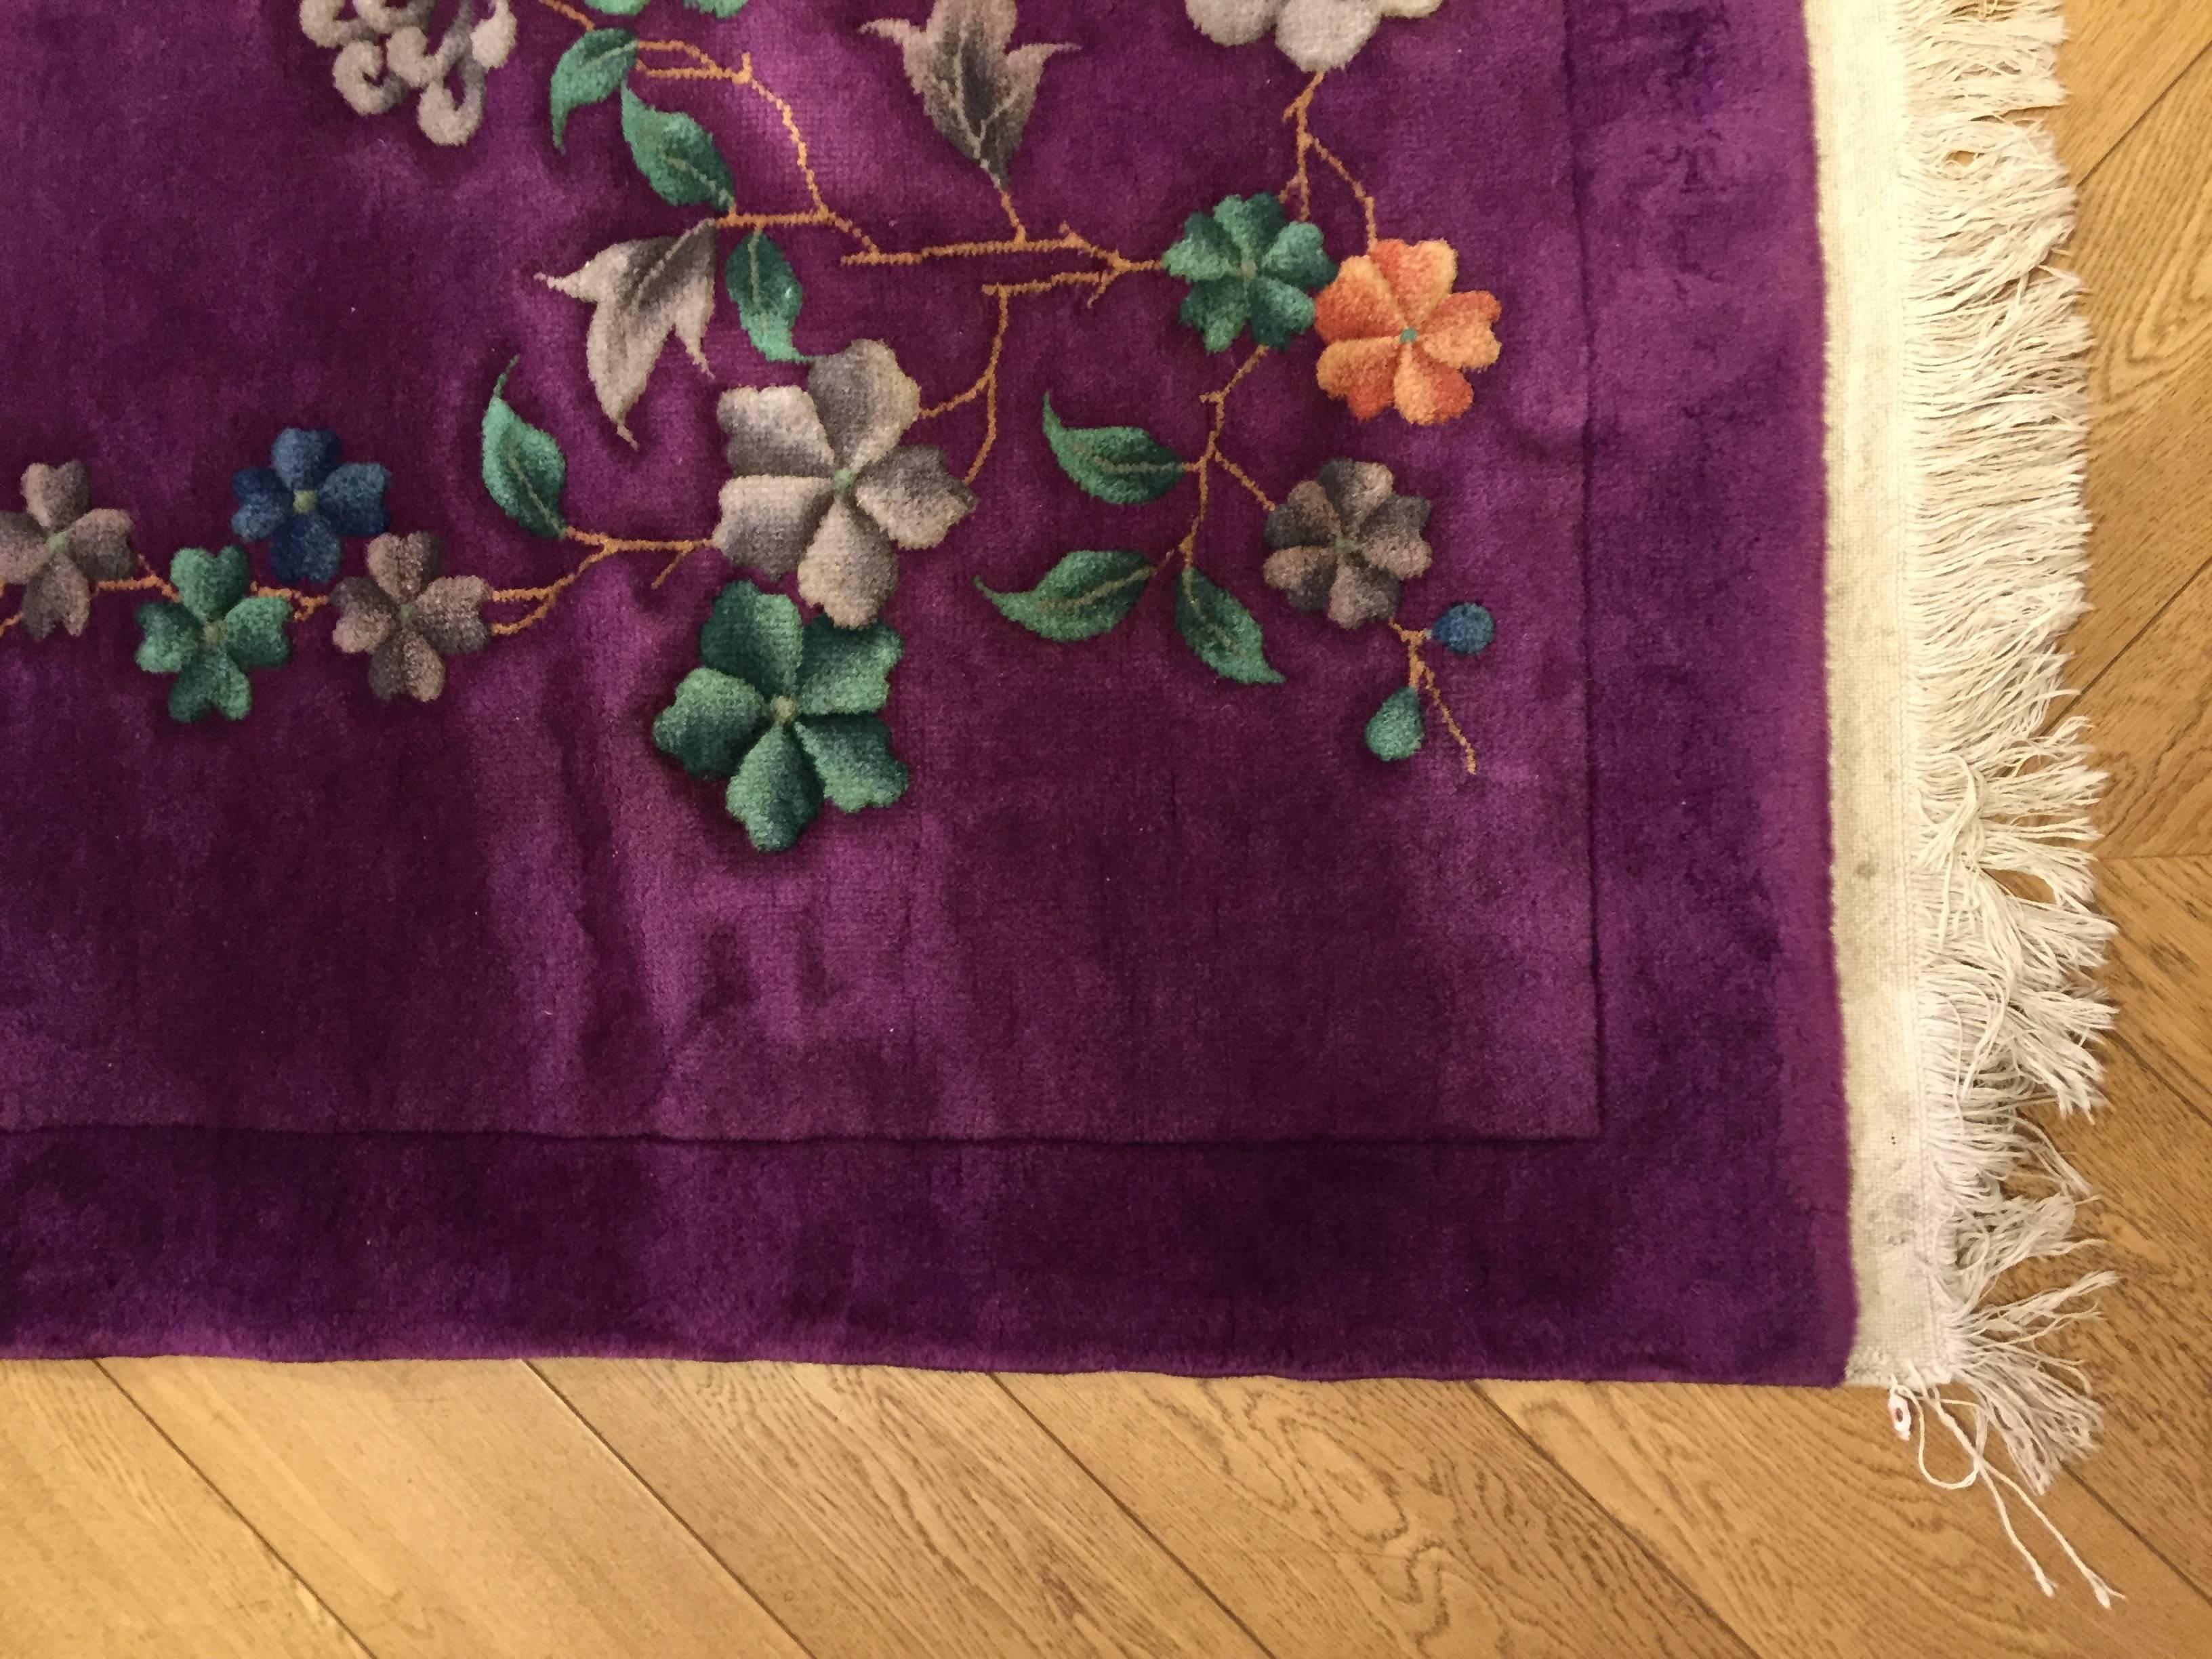 20th Century 1920-1940 Nichols Art Deco Chinese Rug Hand-Knotted Wool Violet 13